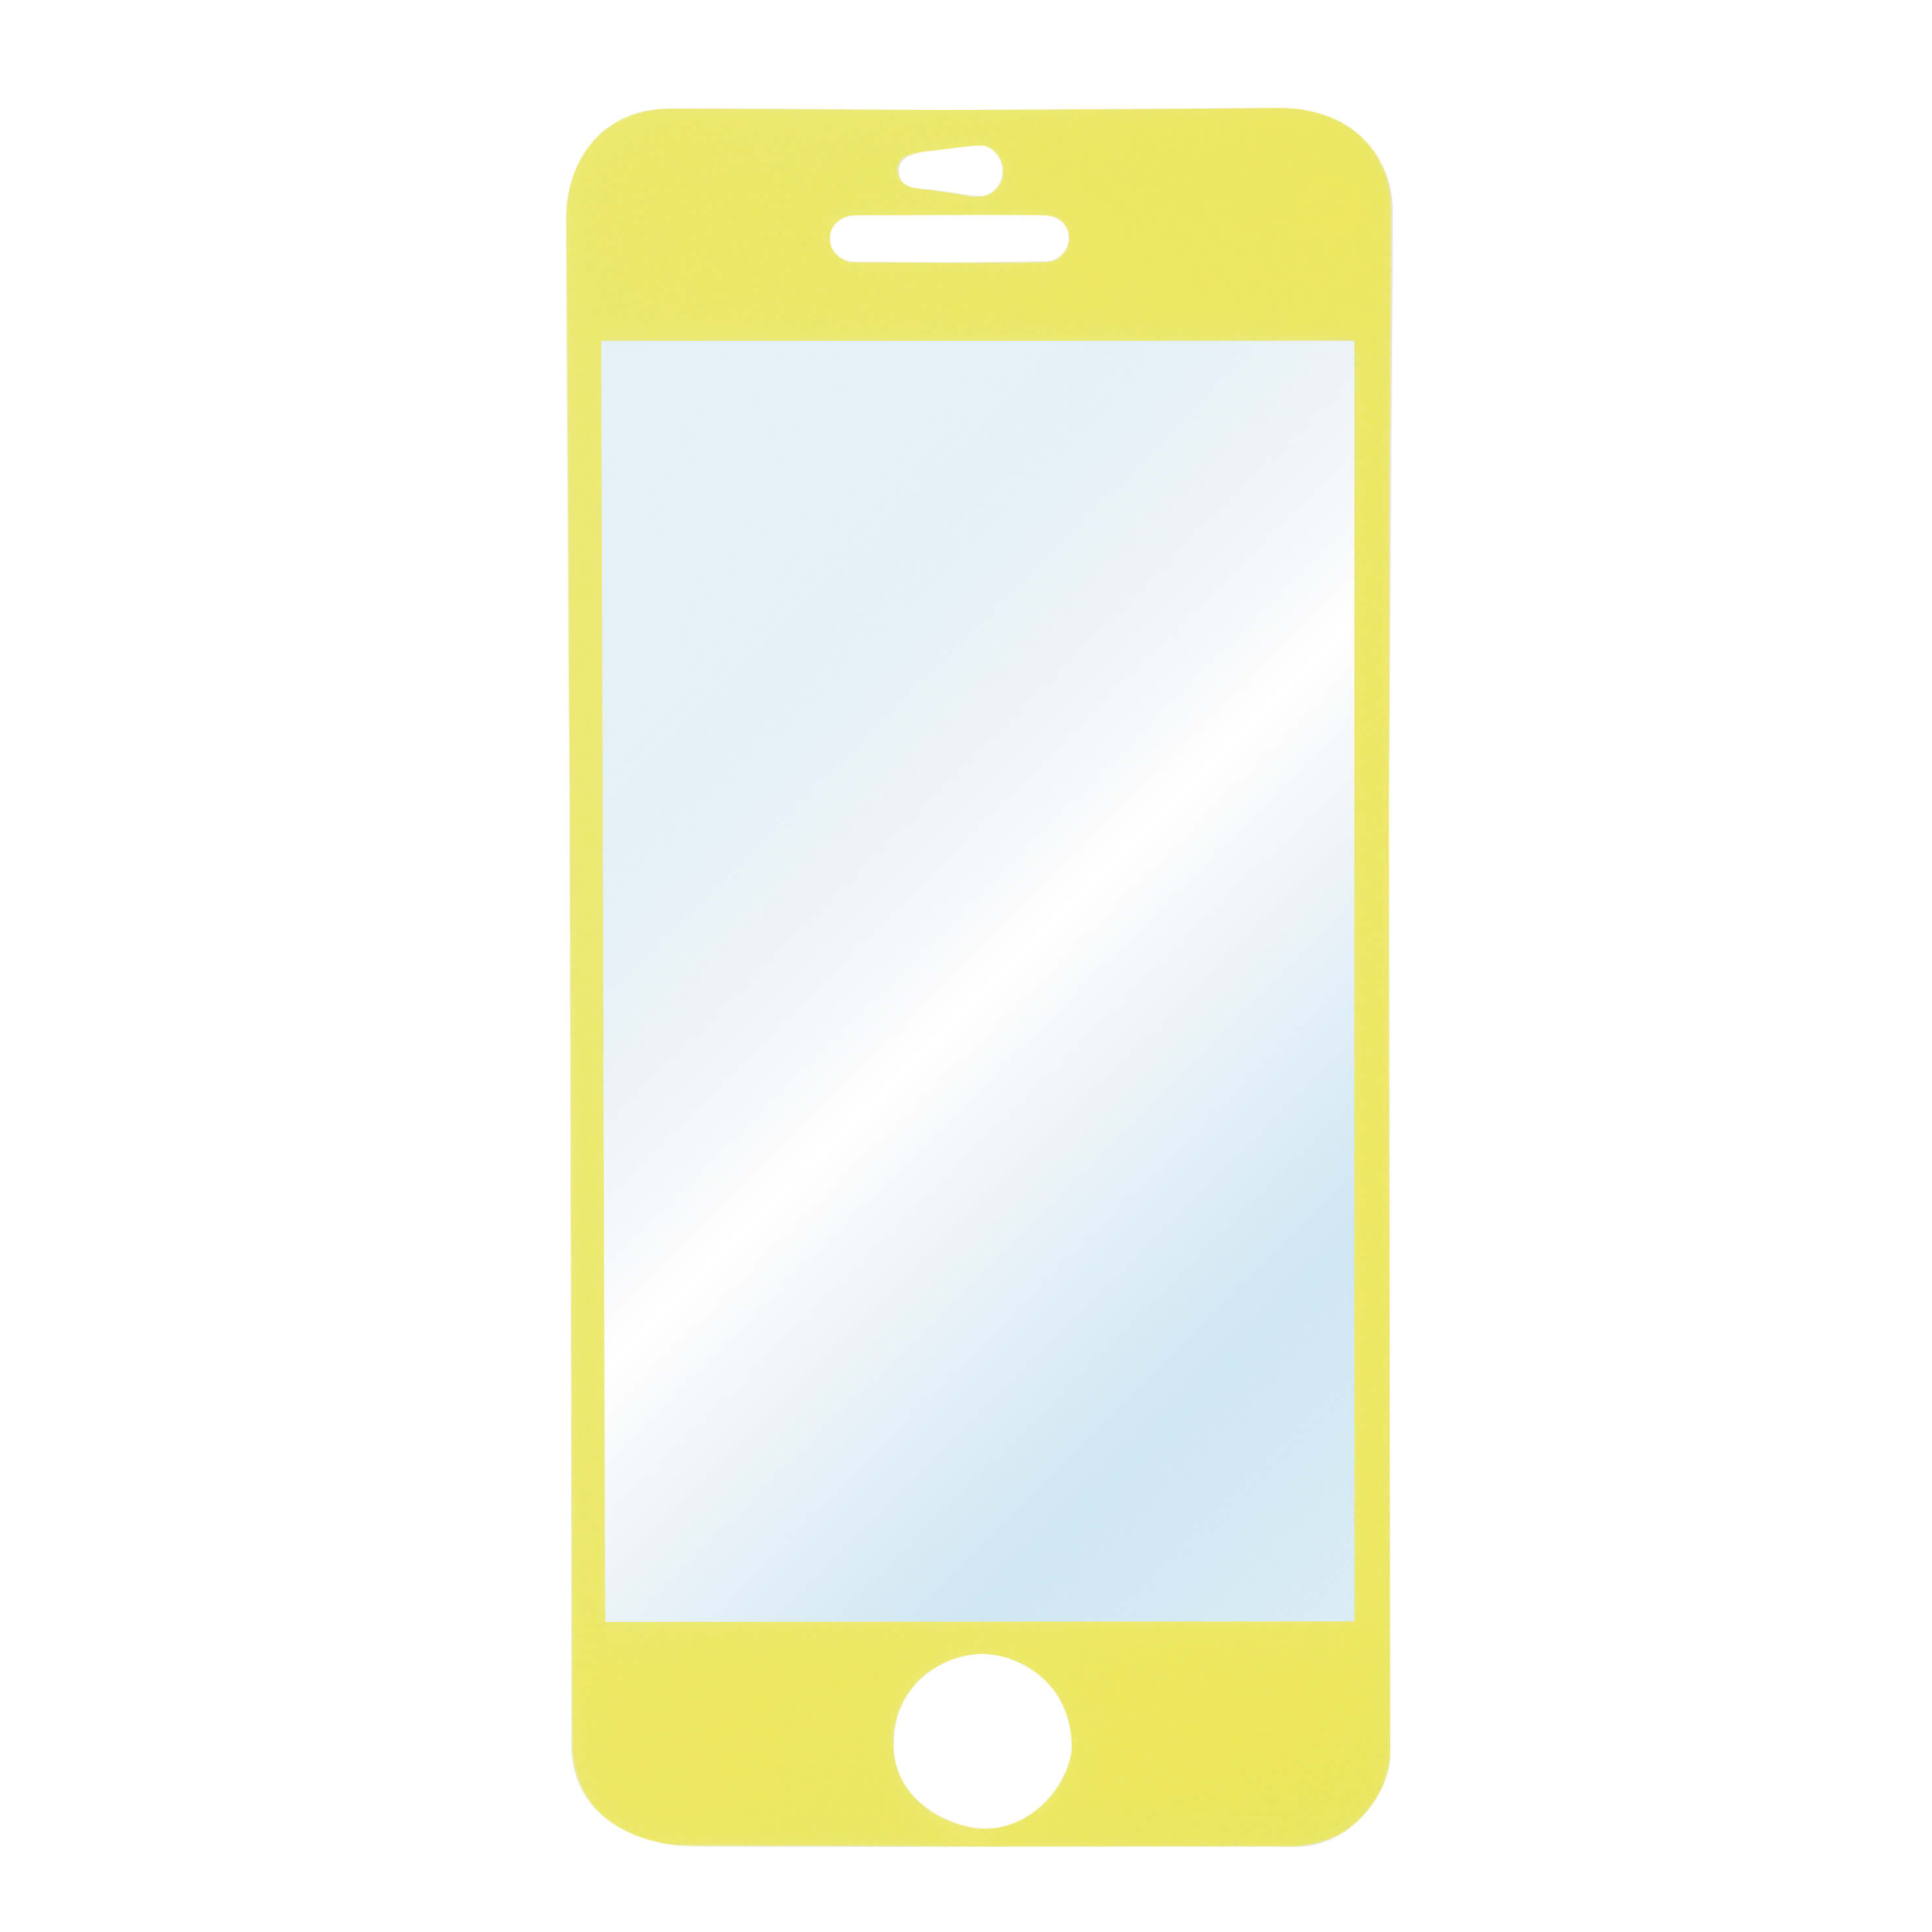 Color Screen Protector for Ap ple iPhone 5c, yellow